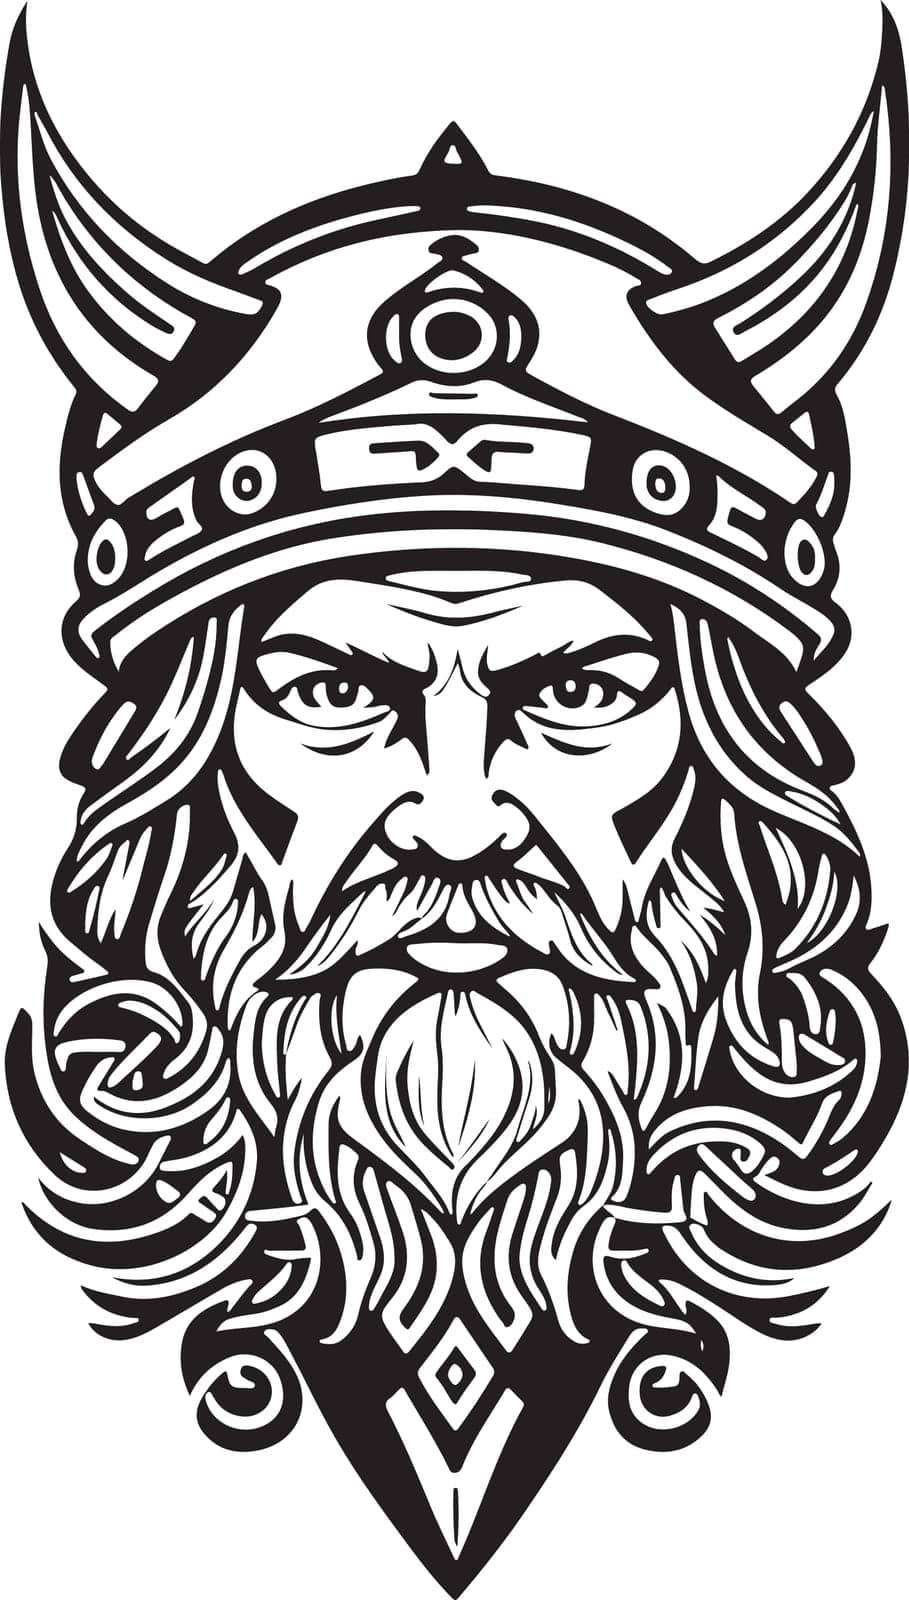 Fantastic line art style Viking head vector graphic template, Suitable for logo design, tattoo design or print on demand. Vector illustration